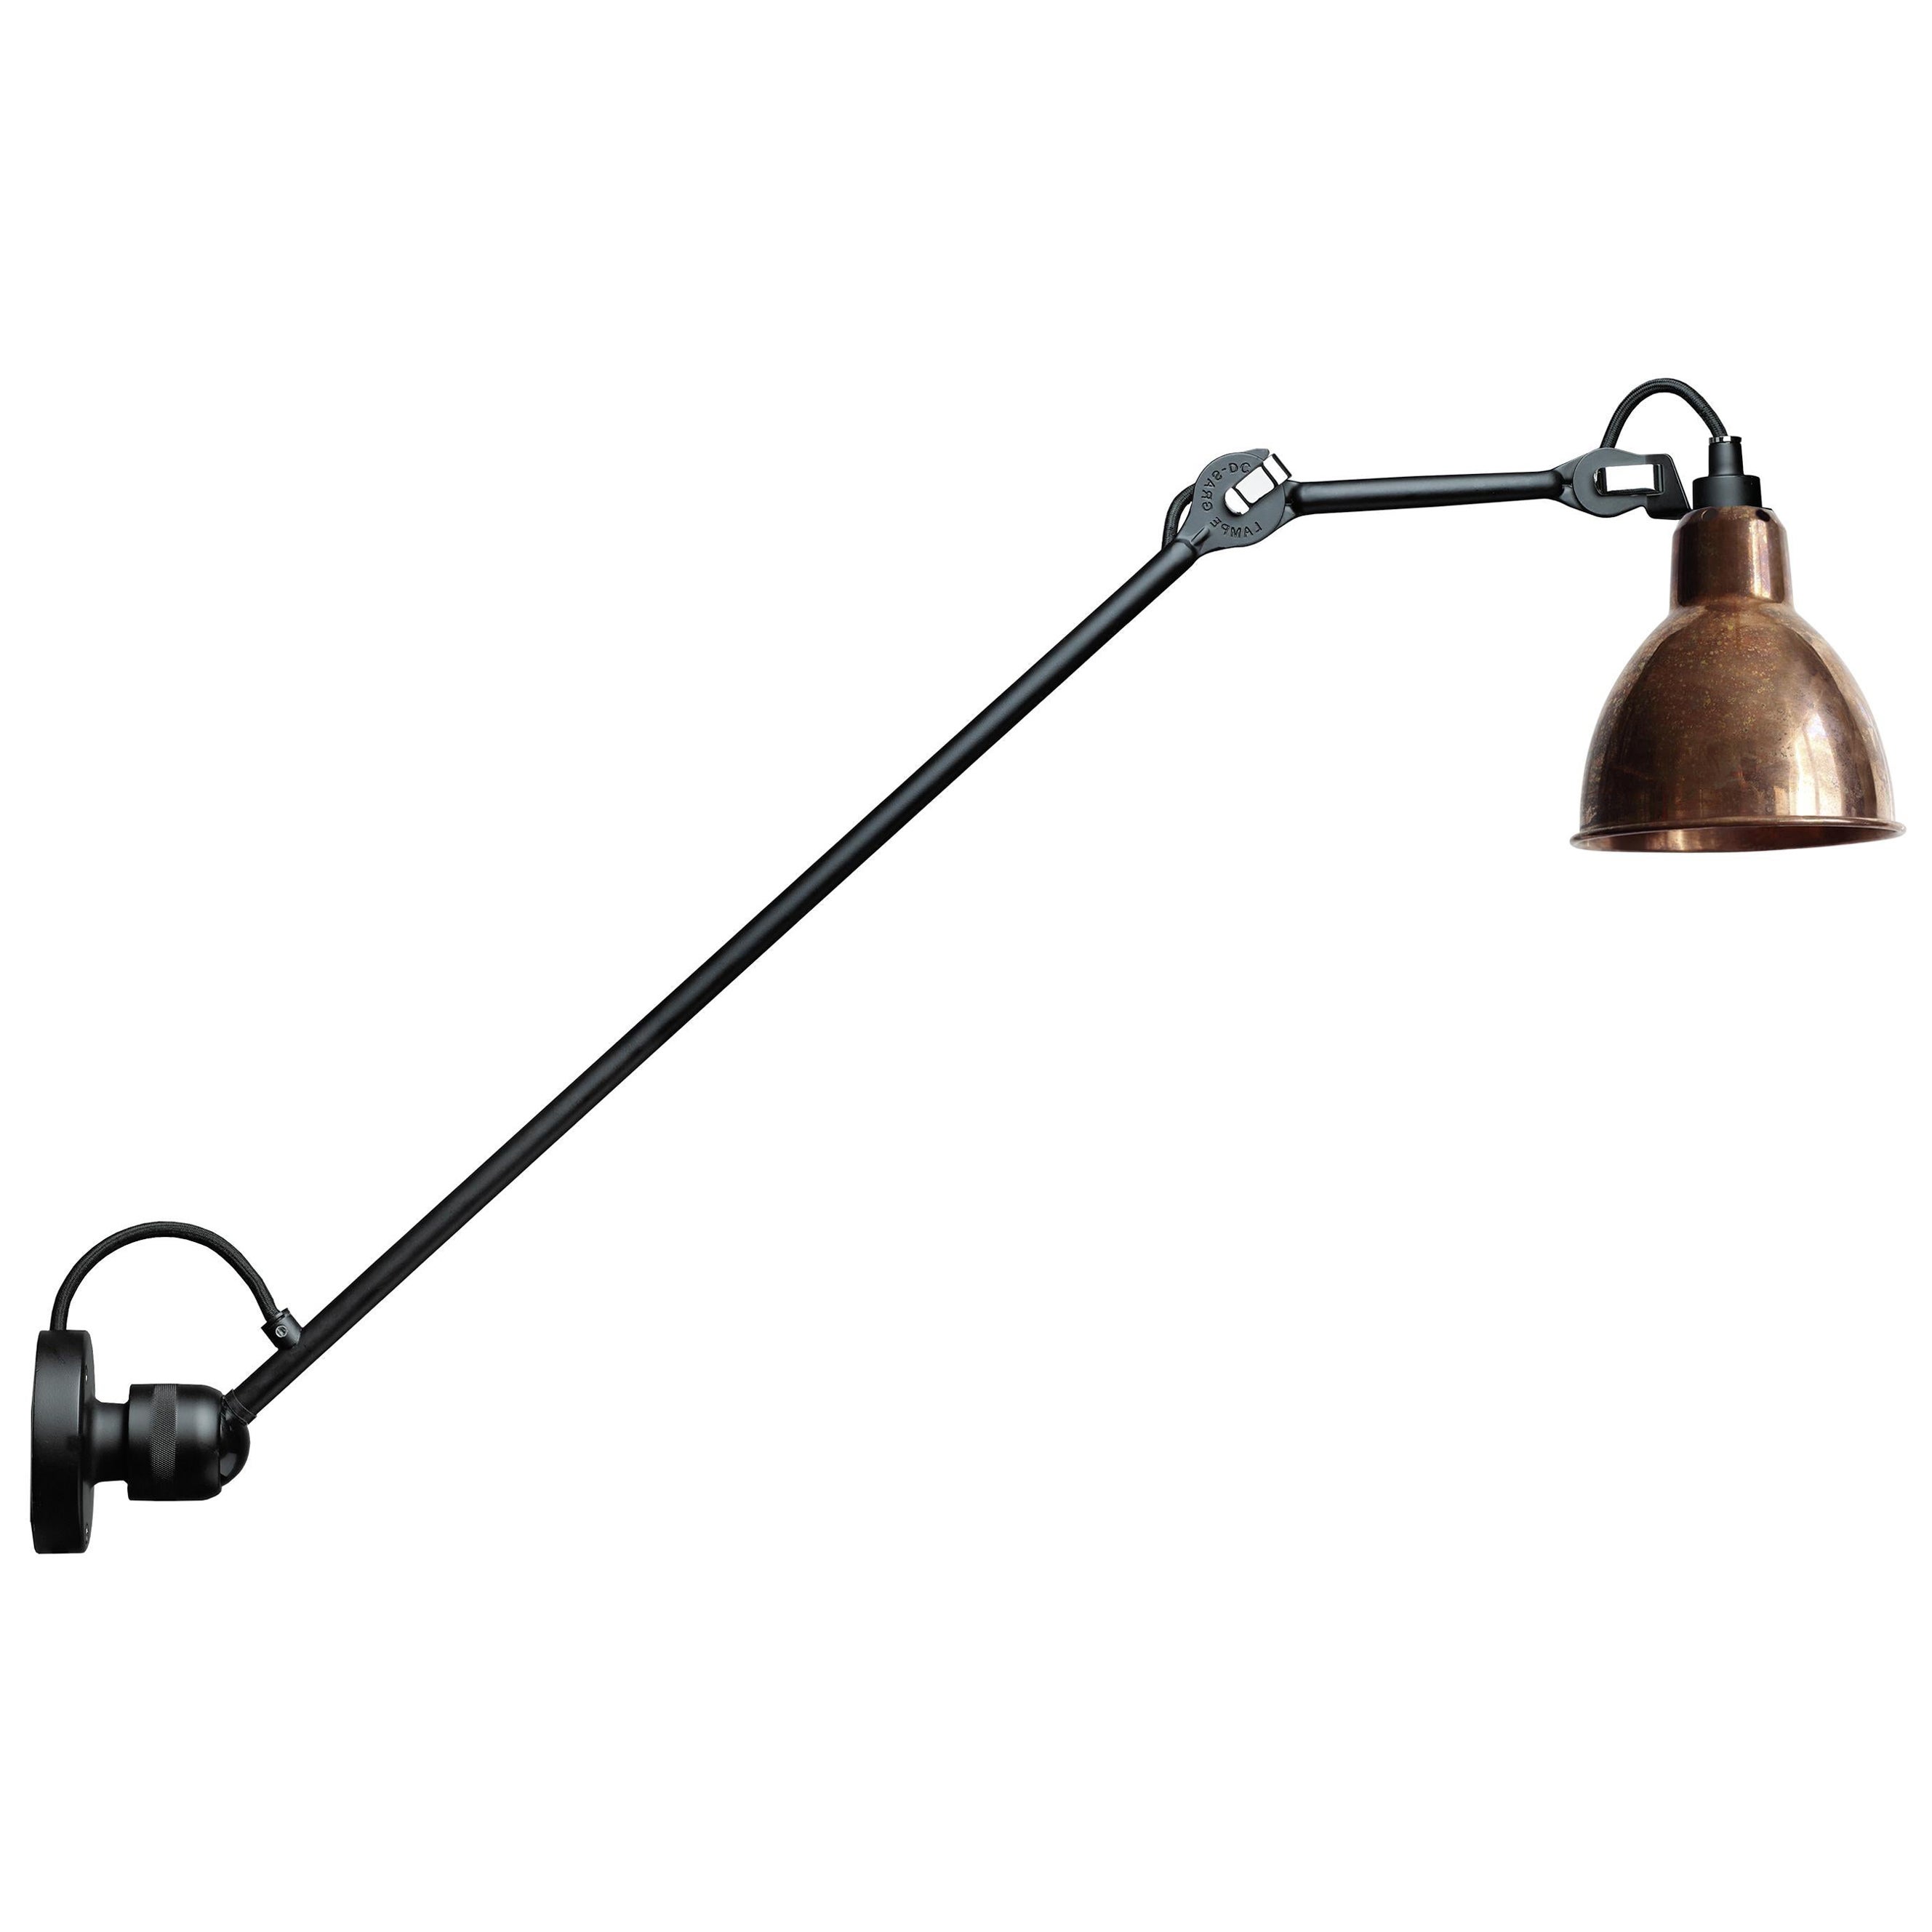 DCW Editions La Lampe Gras N°304 L60 Wall Lamp in Black Arm & Raw Copper Shade For Sale